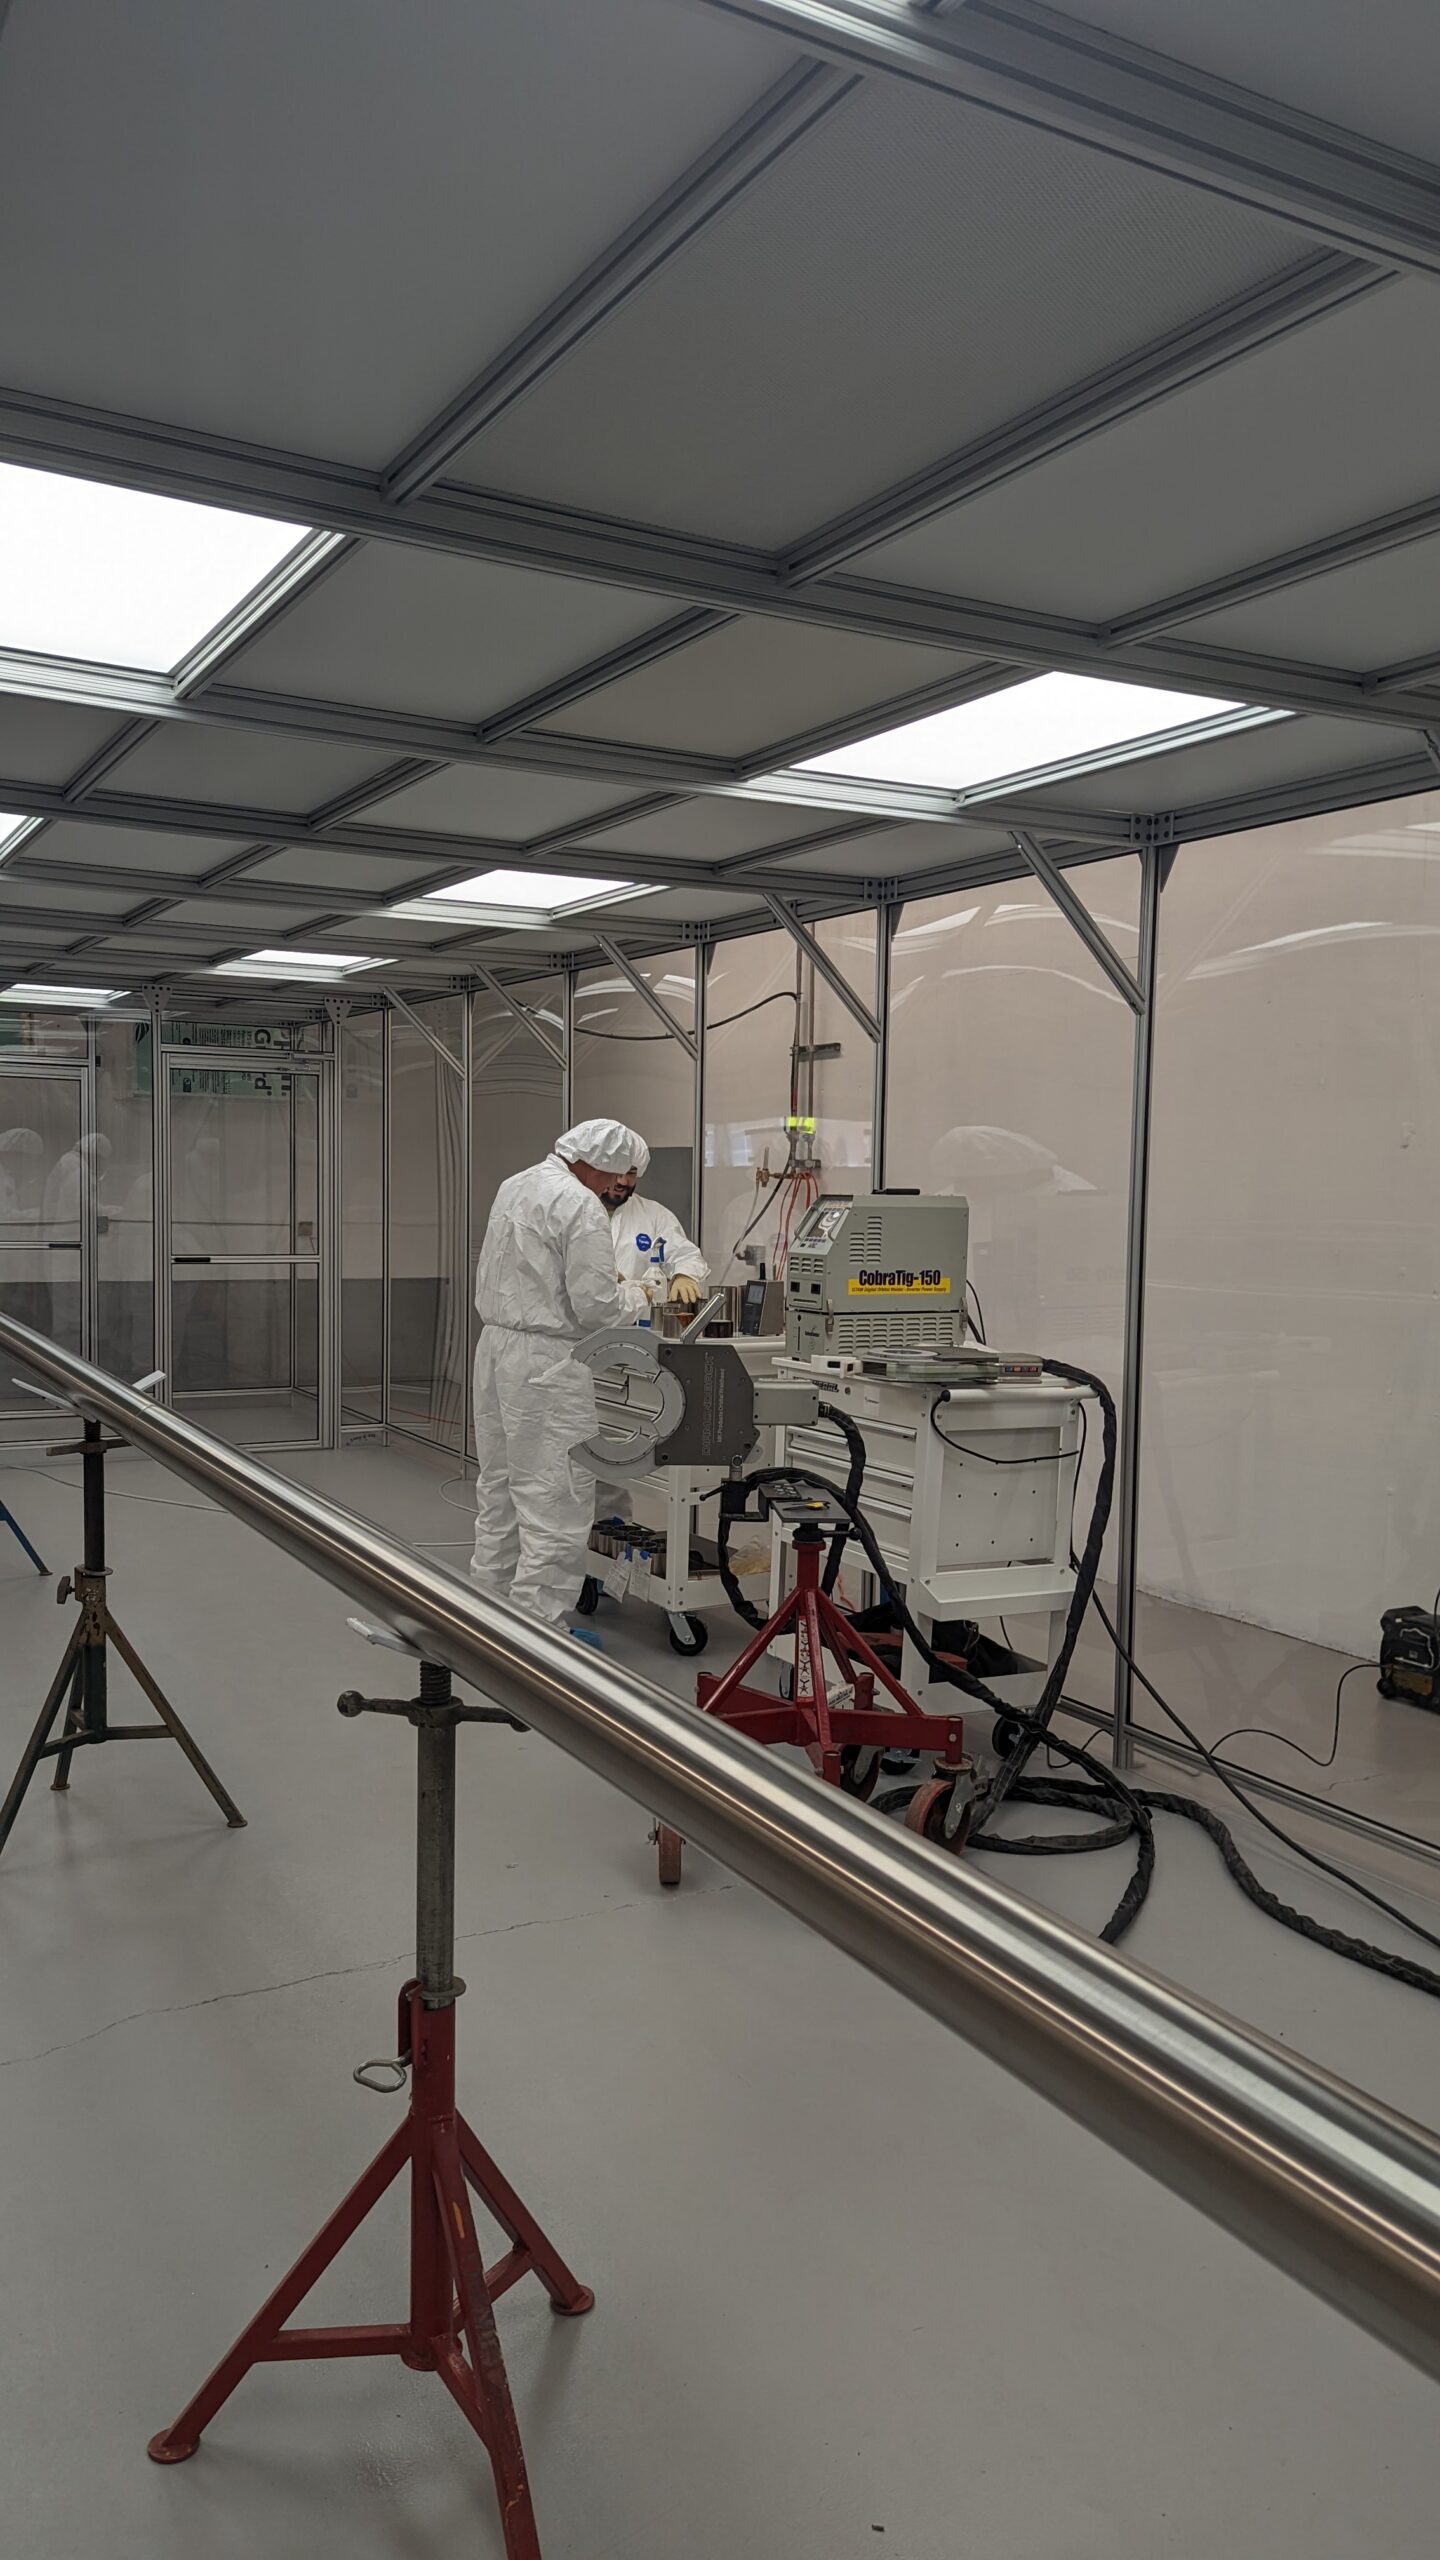 more cleanroom action shots